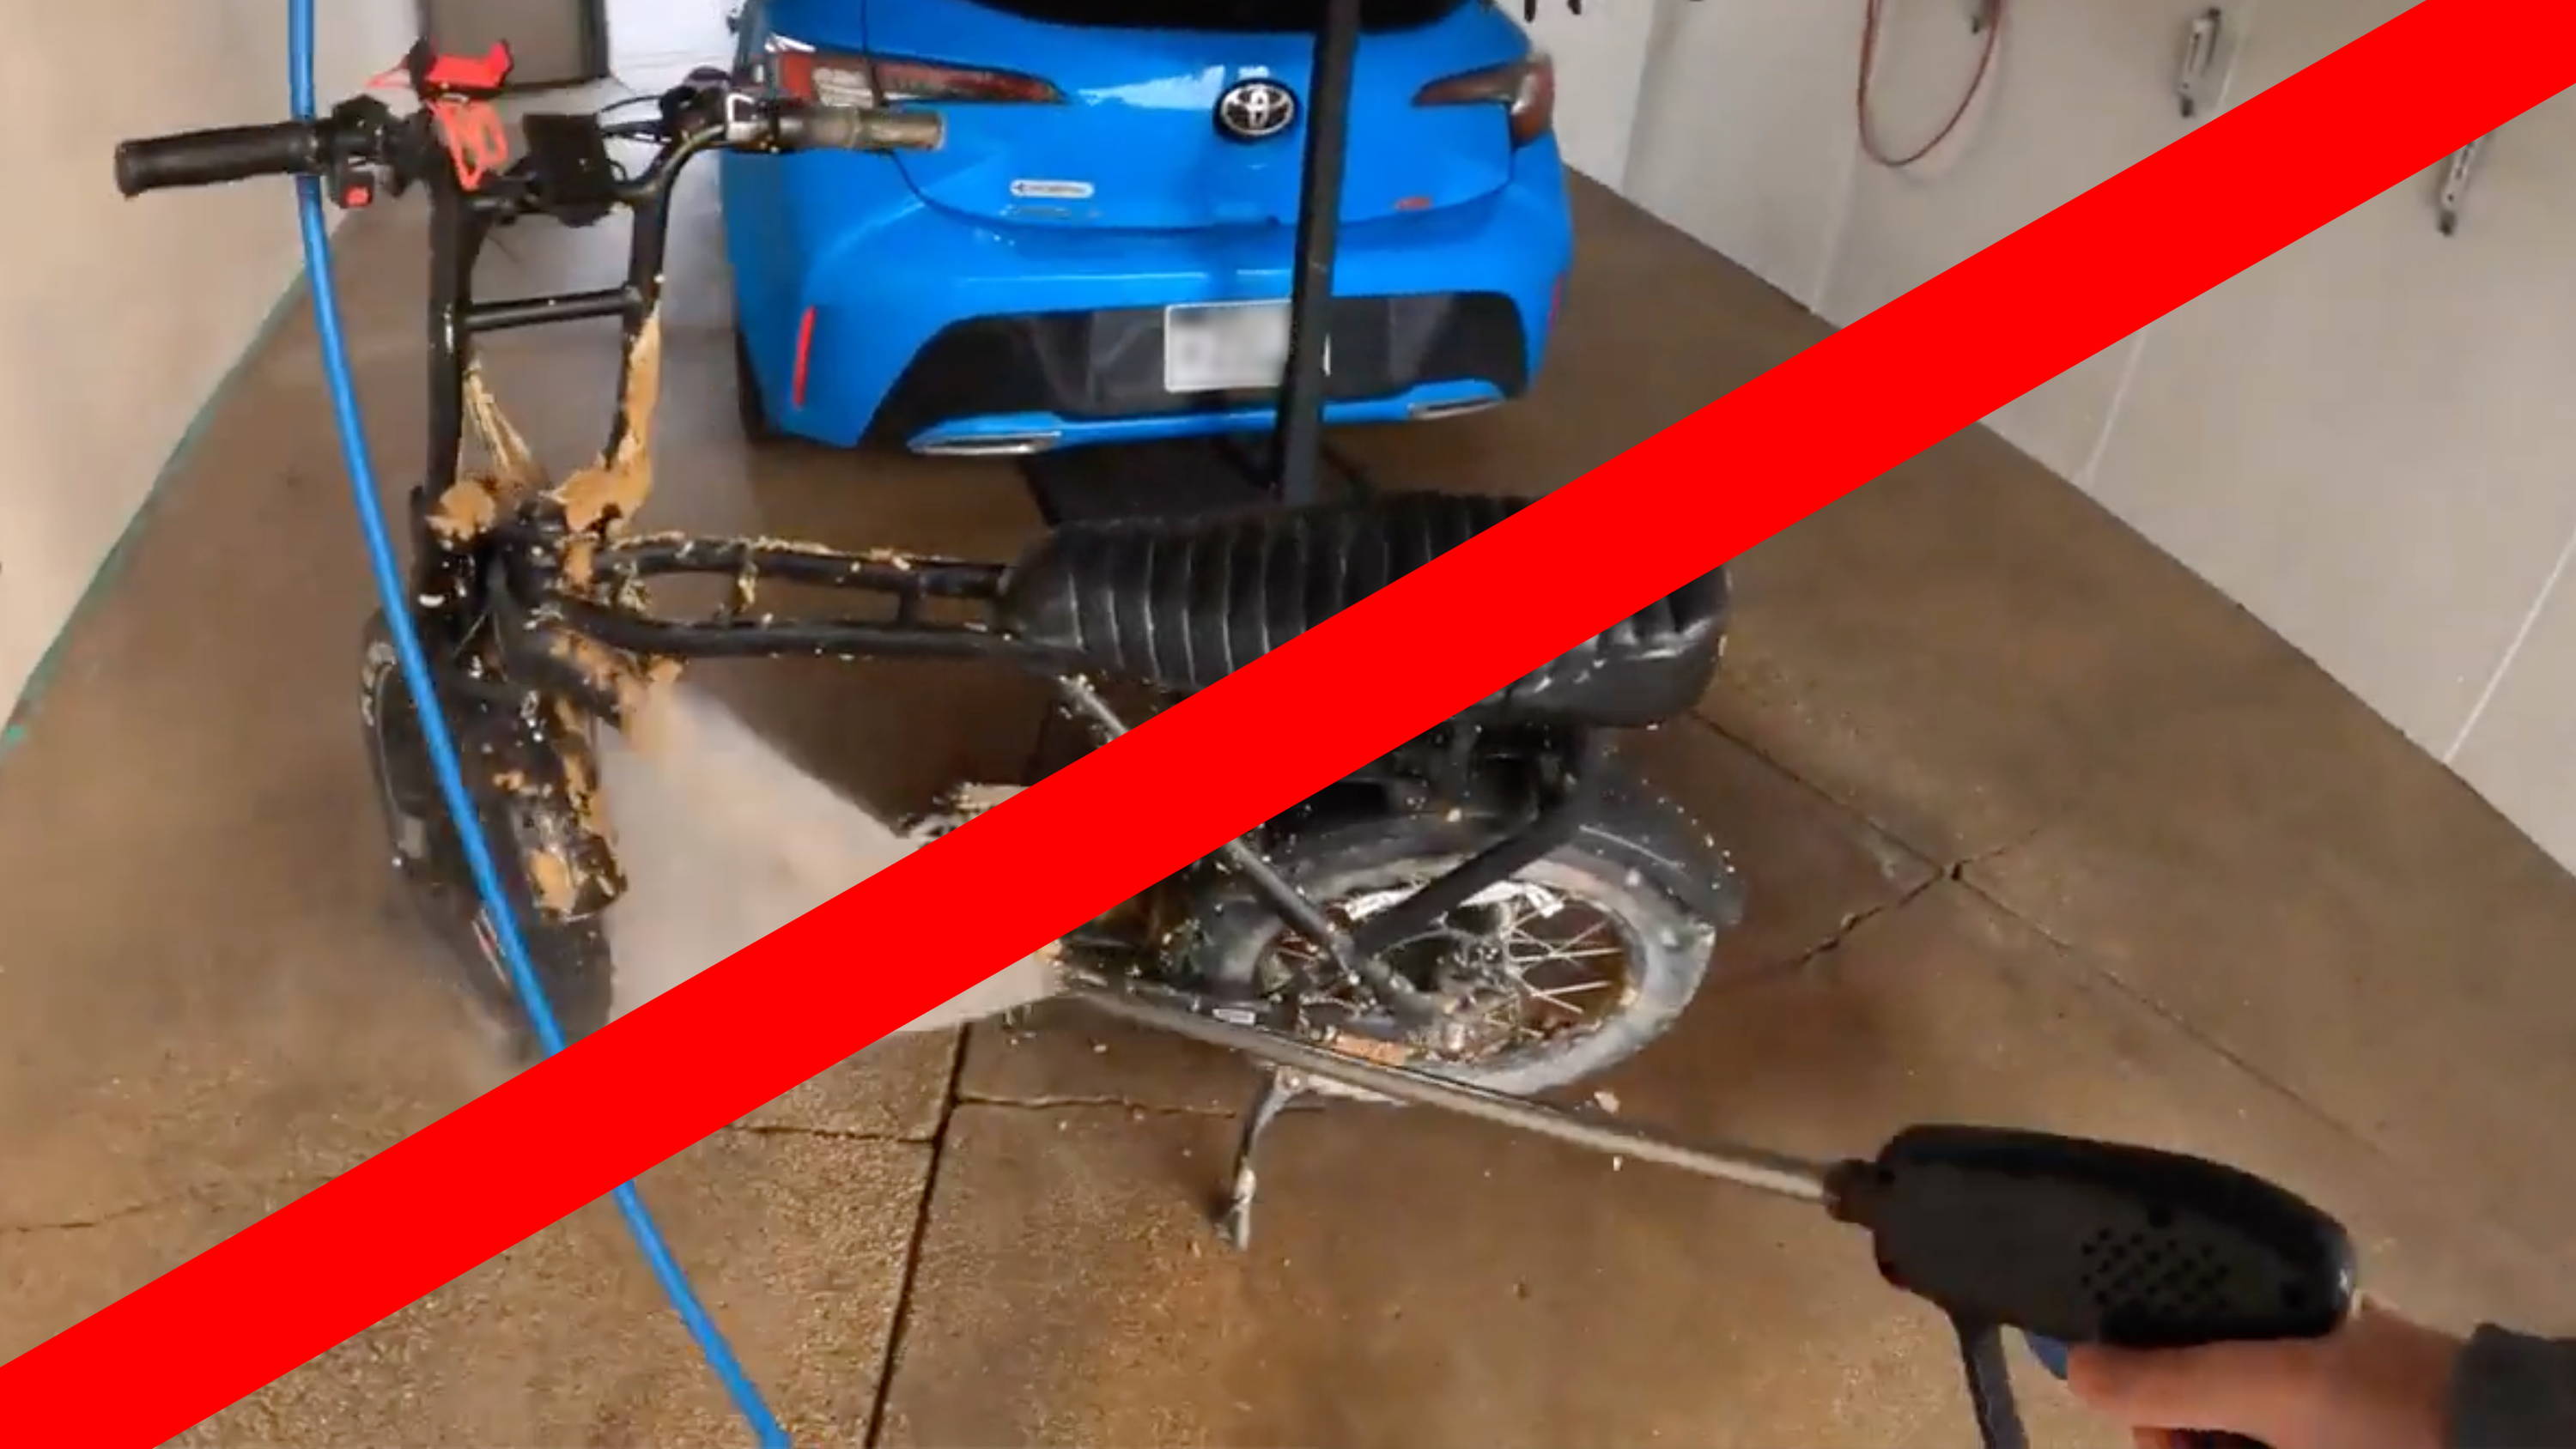 DO NOT powerwash your e-bike! The high pressure water will get inside weatherproof seals, damaging your motor, controller, screen, or battery.